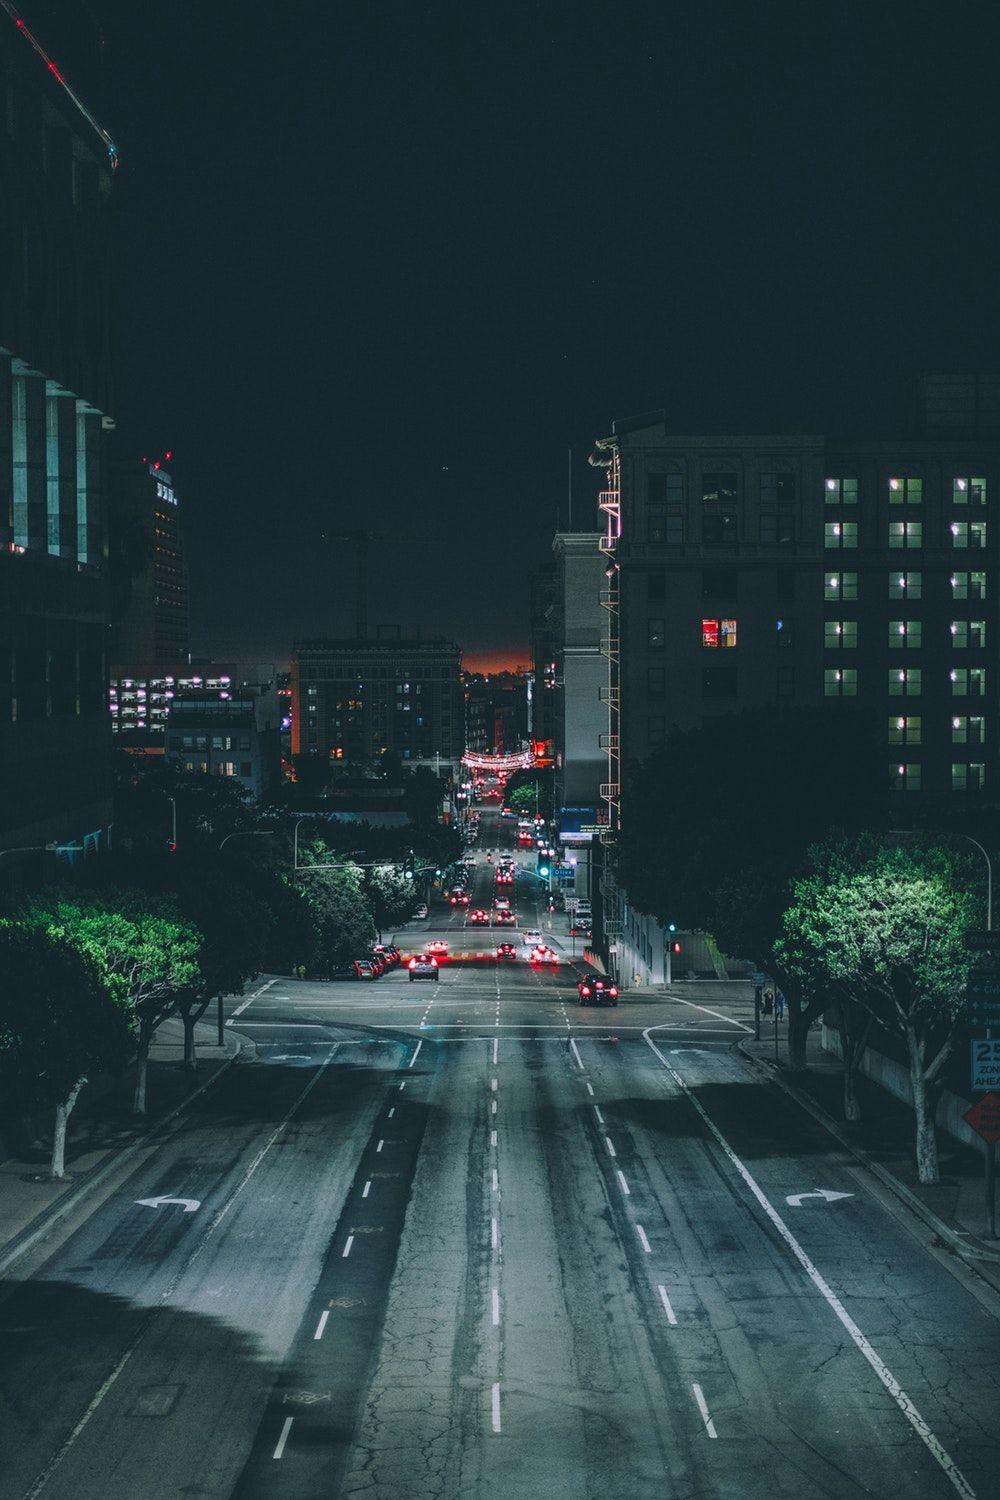 Night Street Picture. Download Free Image